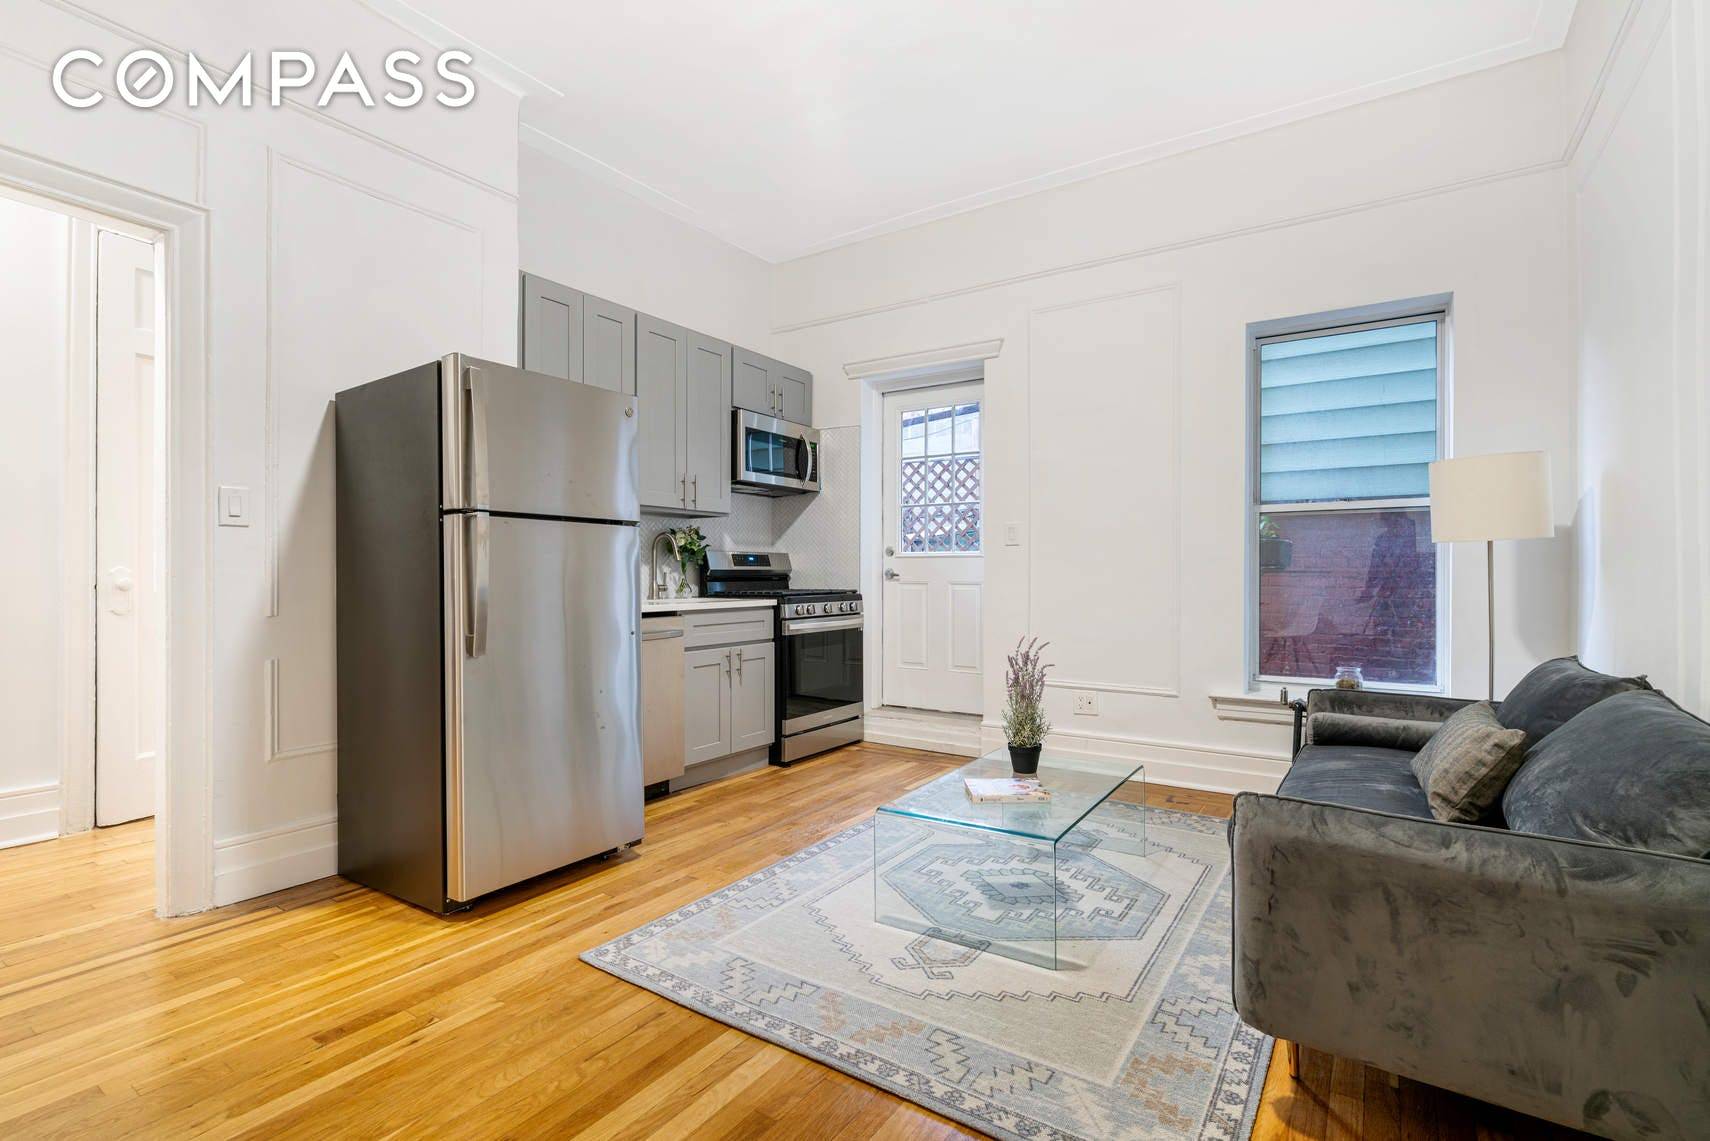 Park Slope No Fee Newly Renovated 1BD 1BA Home with Expansive Layout, Washer Dryer In Unit, Large Bedroom, Hardwood Floors, Windowed Kitchen, Stainless Steel Appliances including D W and M ...